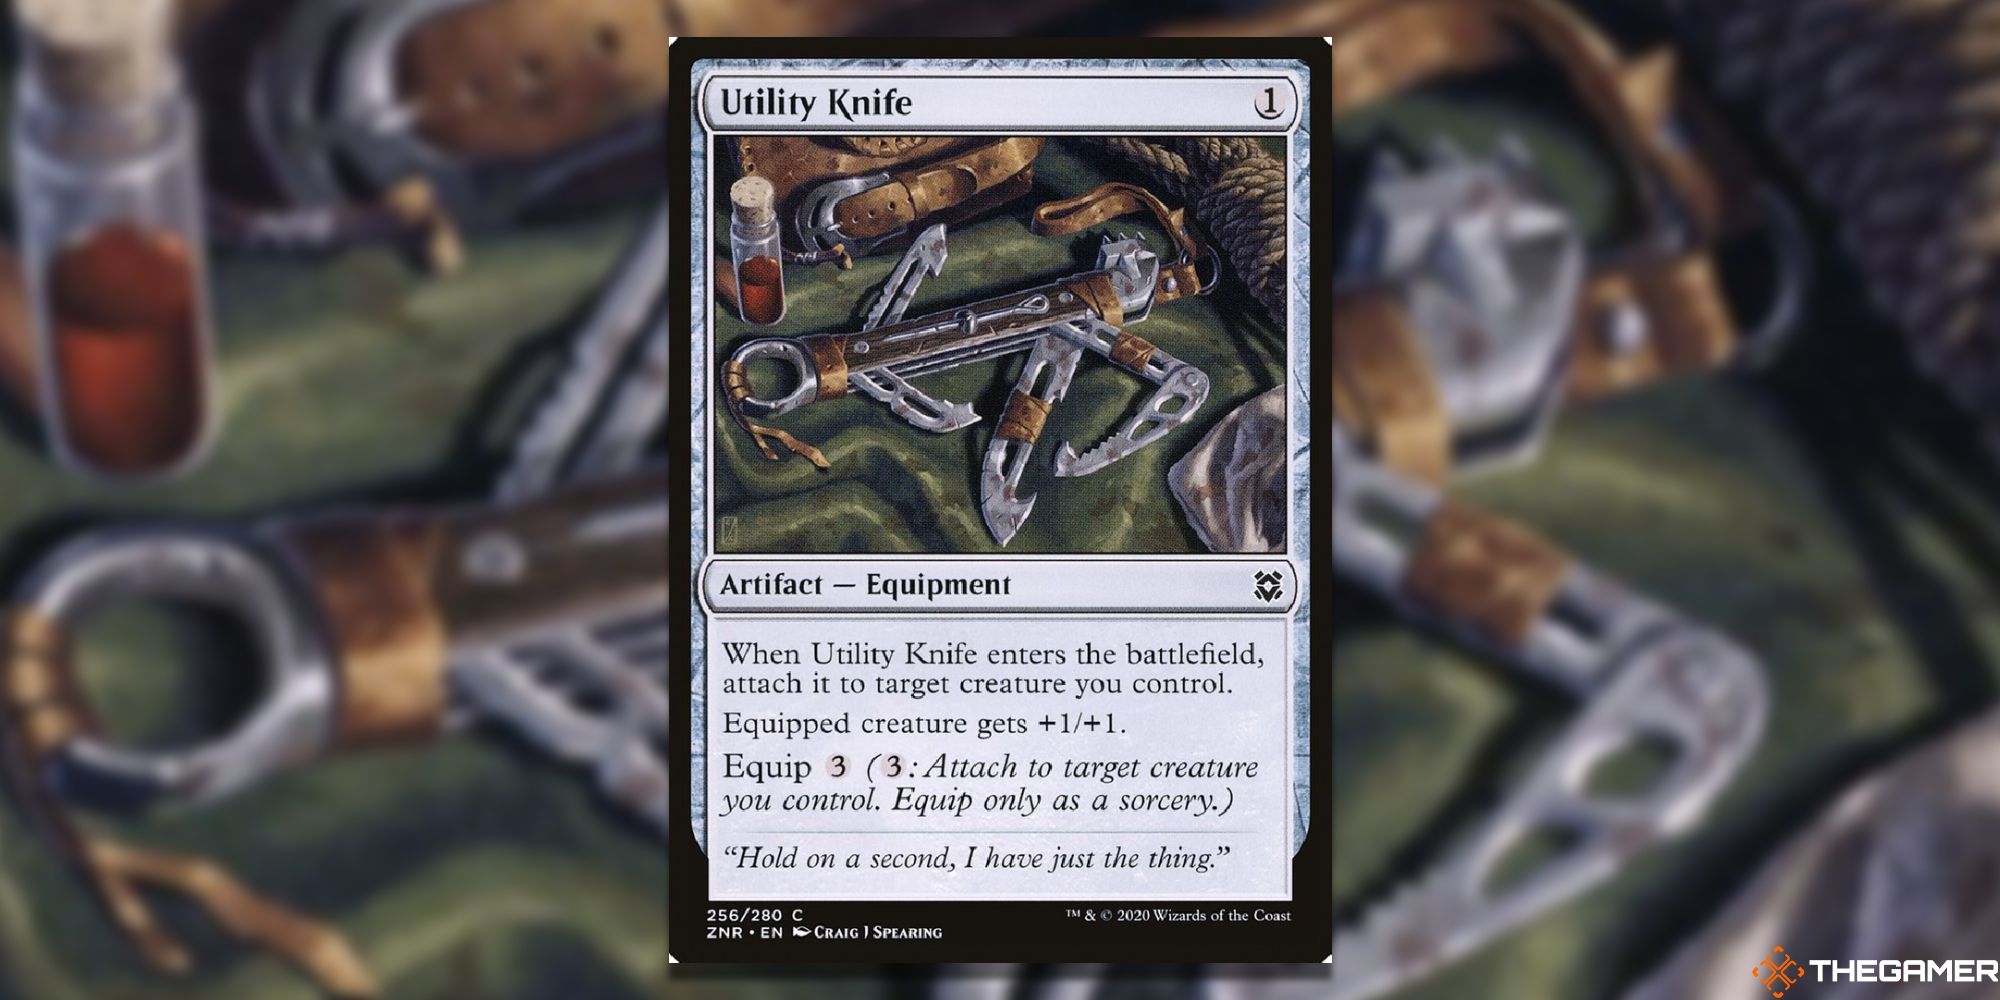 Magic: The Gathering Utility Knife full card with background